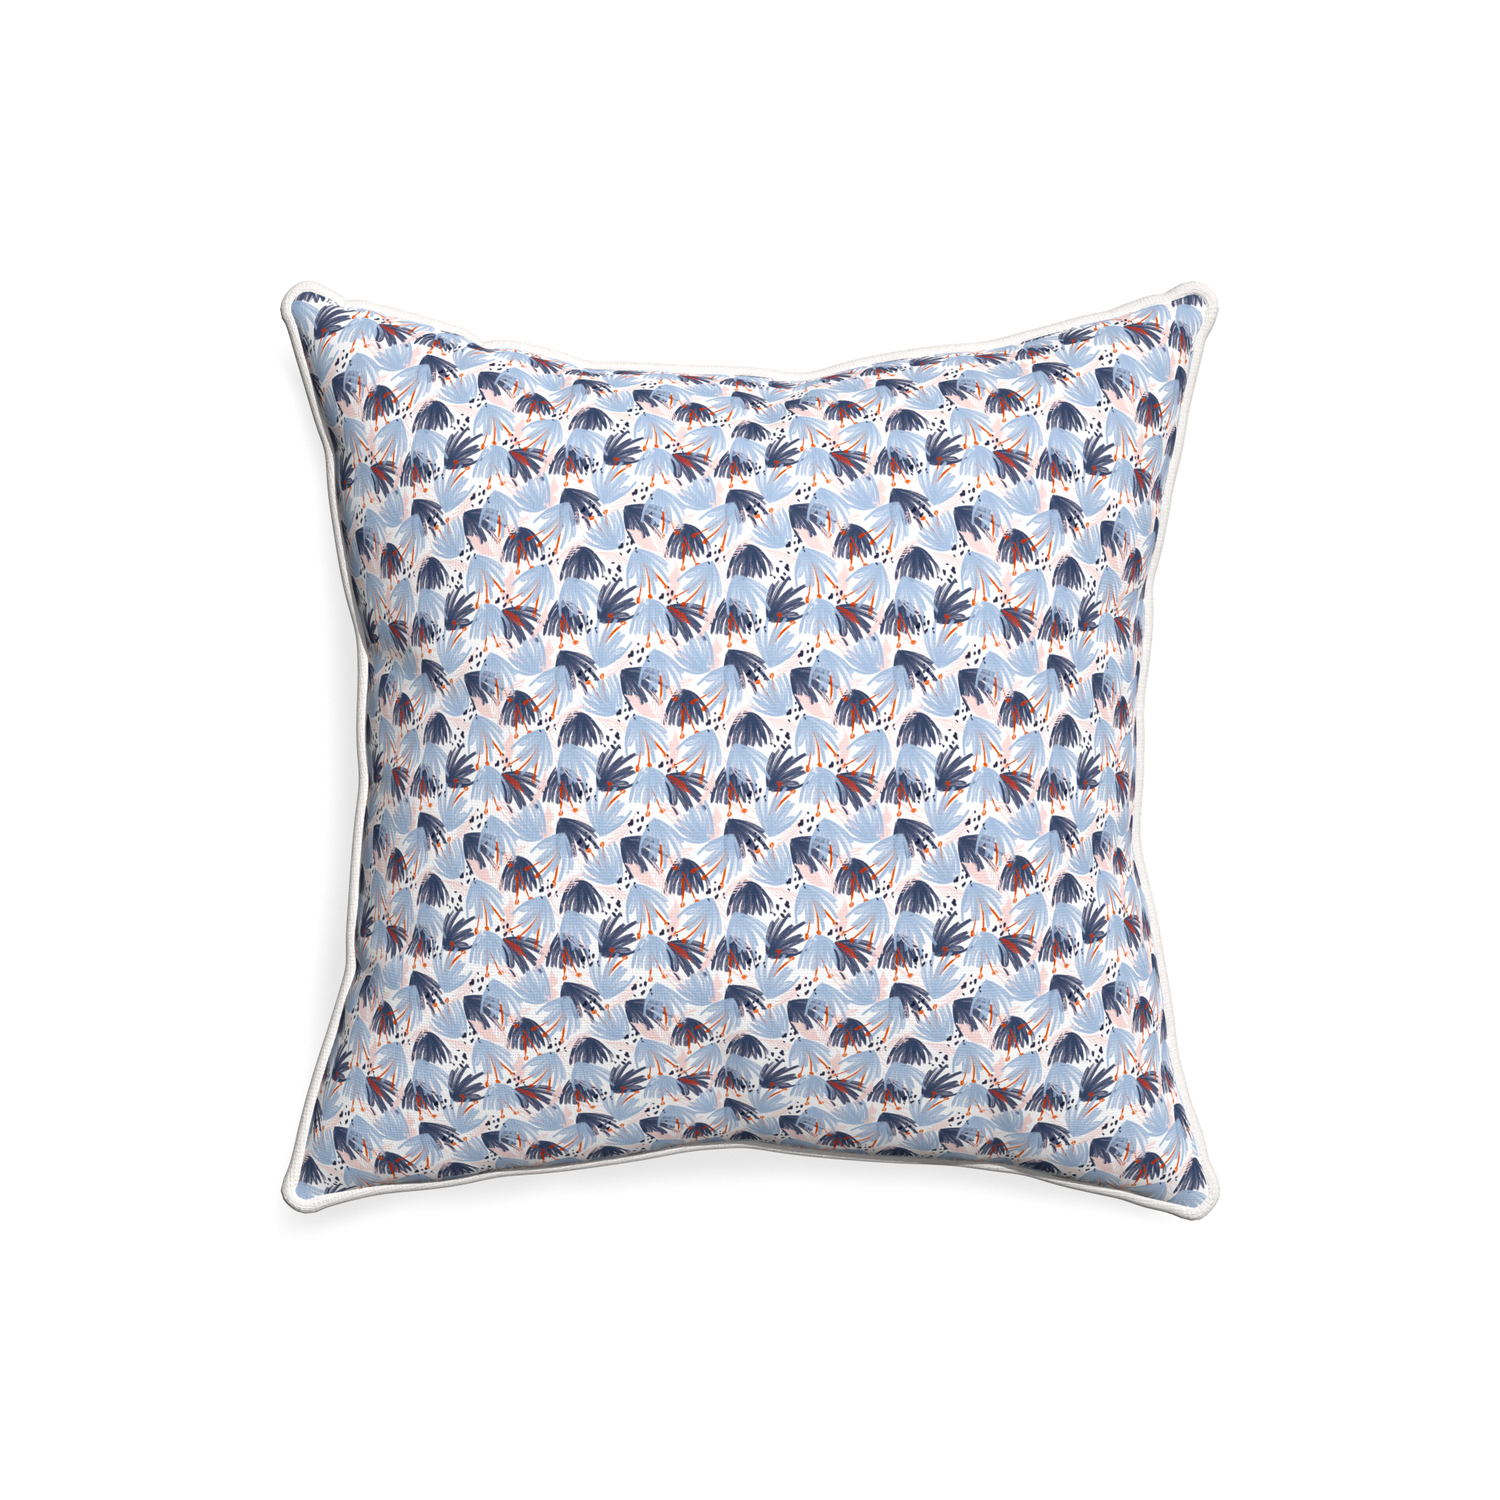 20-square eden blue custom pillow with snow piping on white background